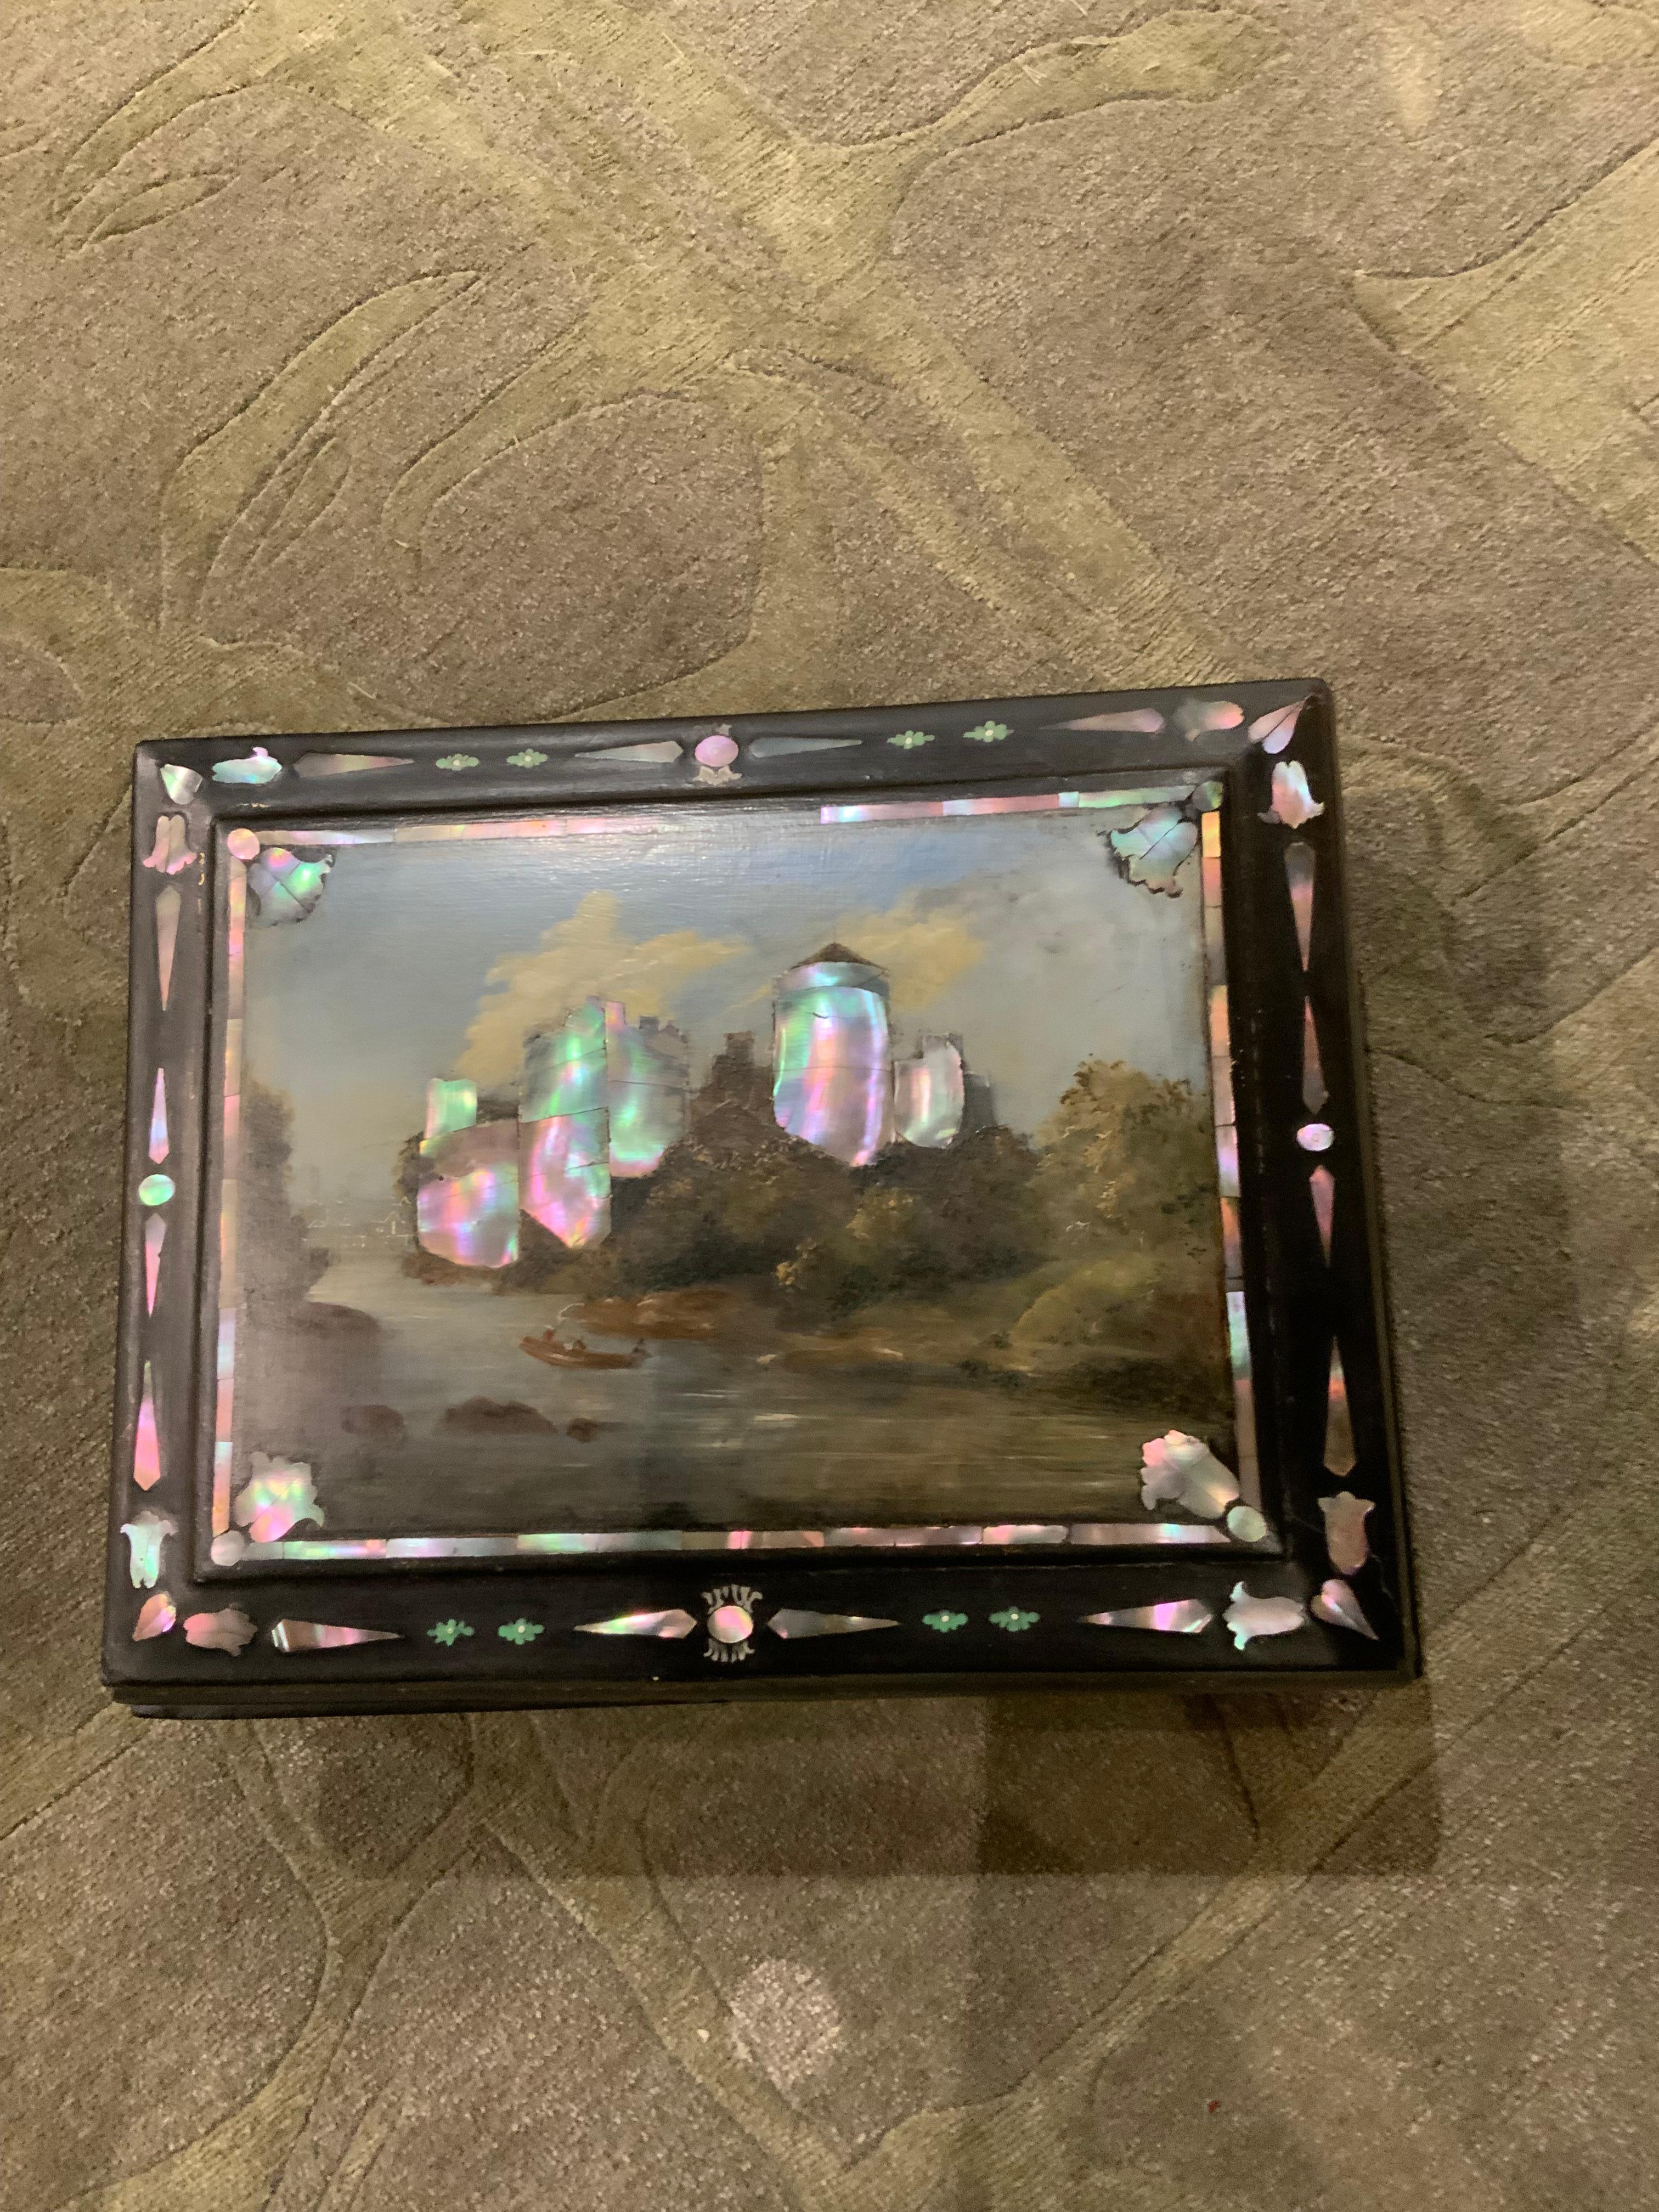 This antique box is from London made from papier-mâché 
The top is hand painted and inlaid with mother of pearl.
It is finely painted and has an interior with defined
Spaces for writing implements and stationery the inside
Is lined with emerald